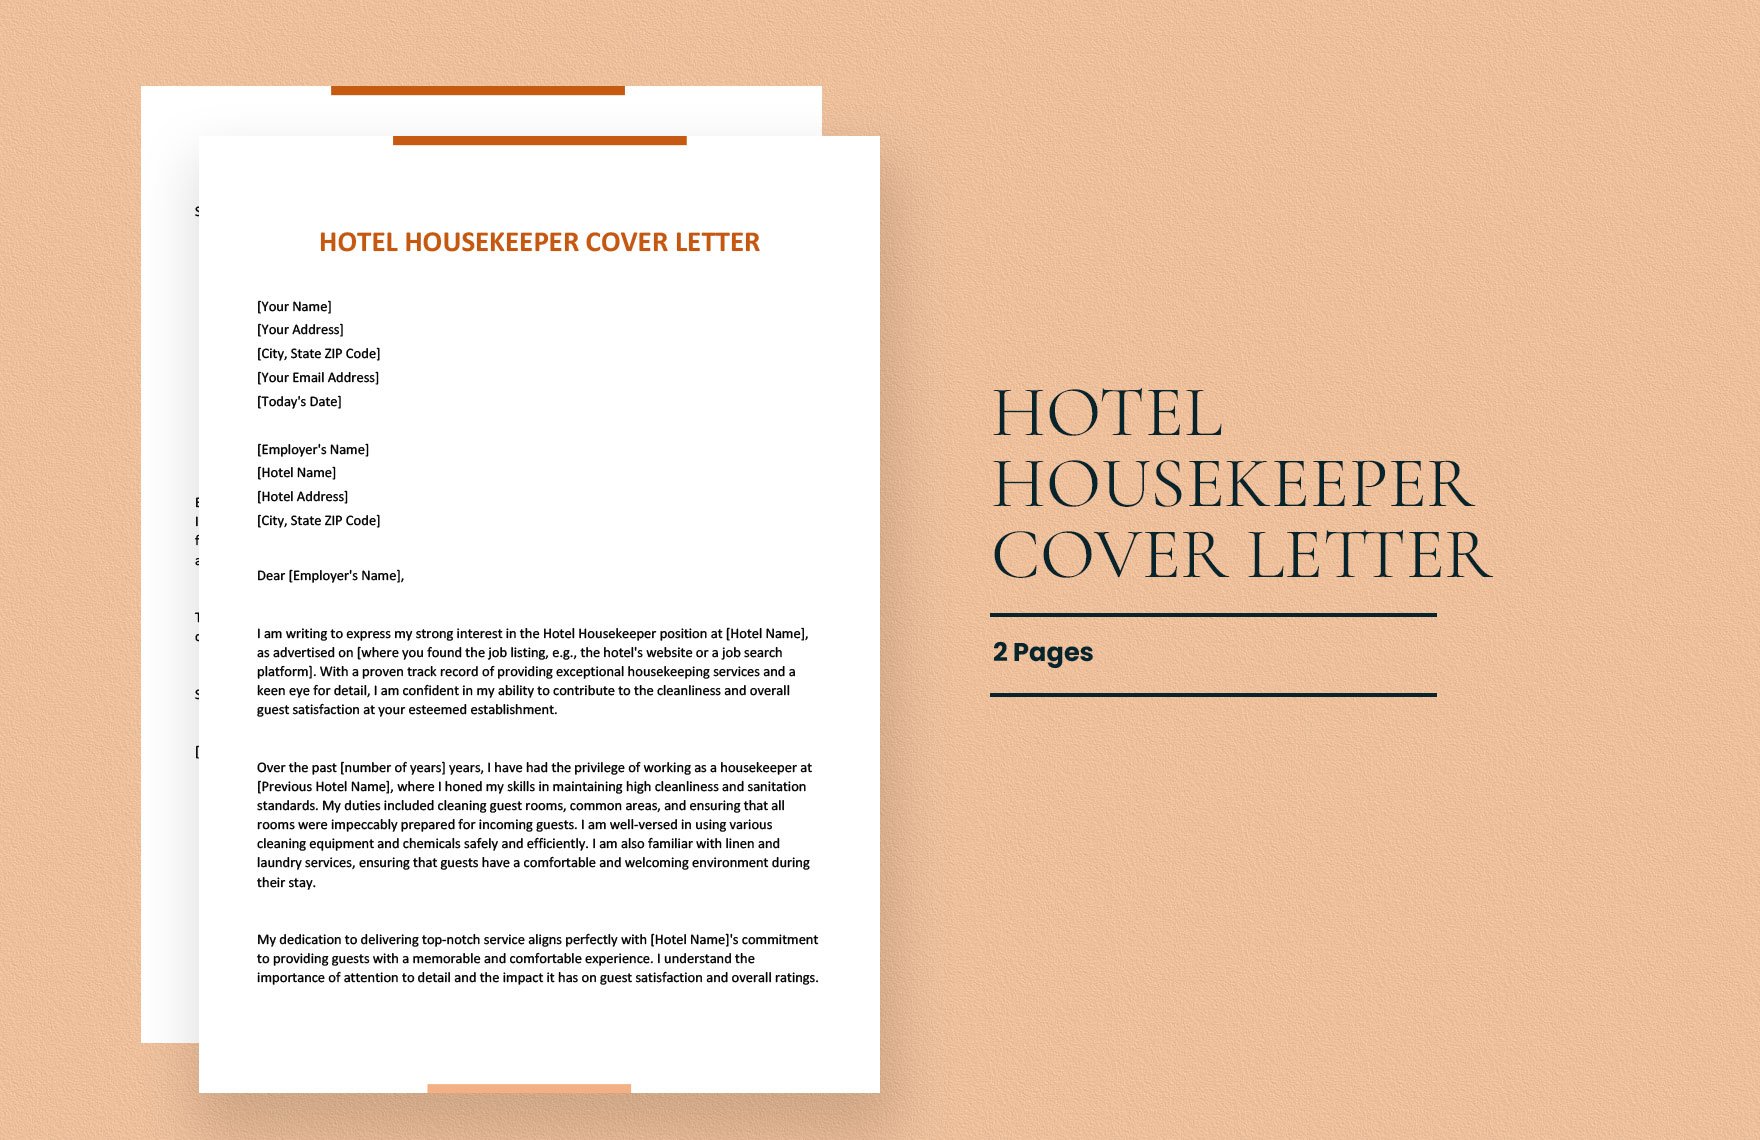 Hotel Housekeeper Cover Letter